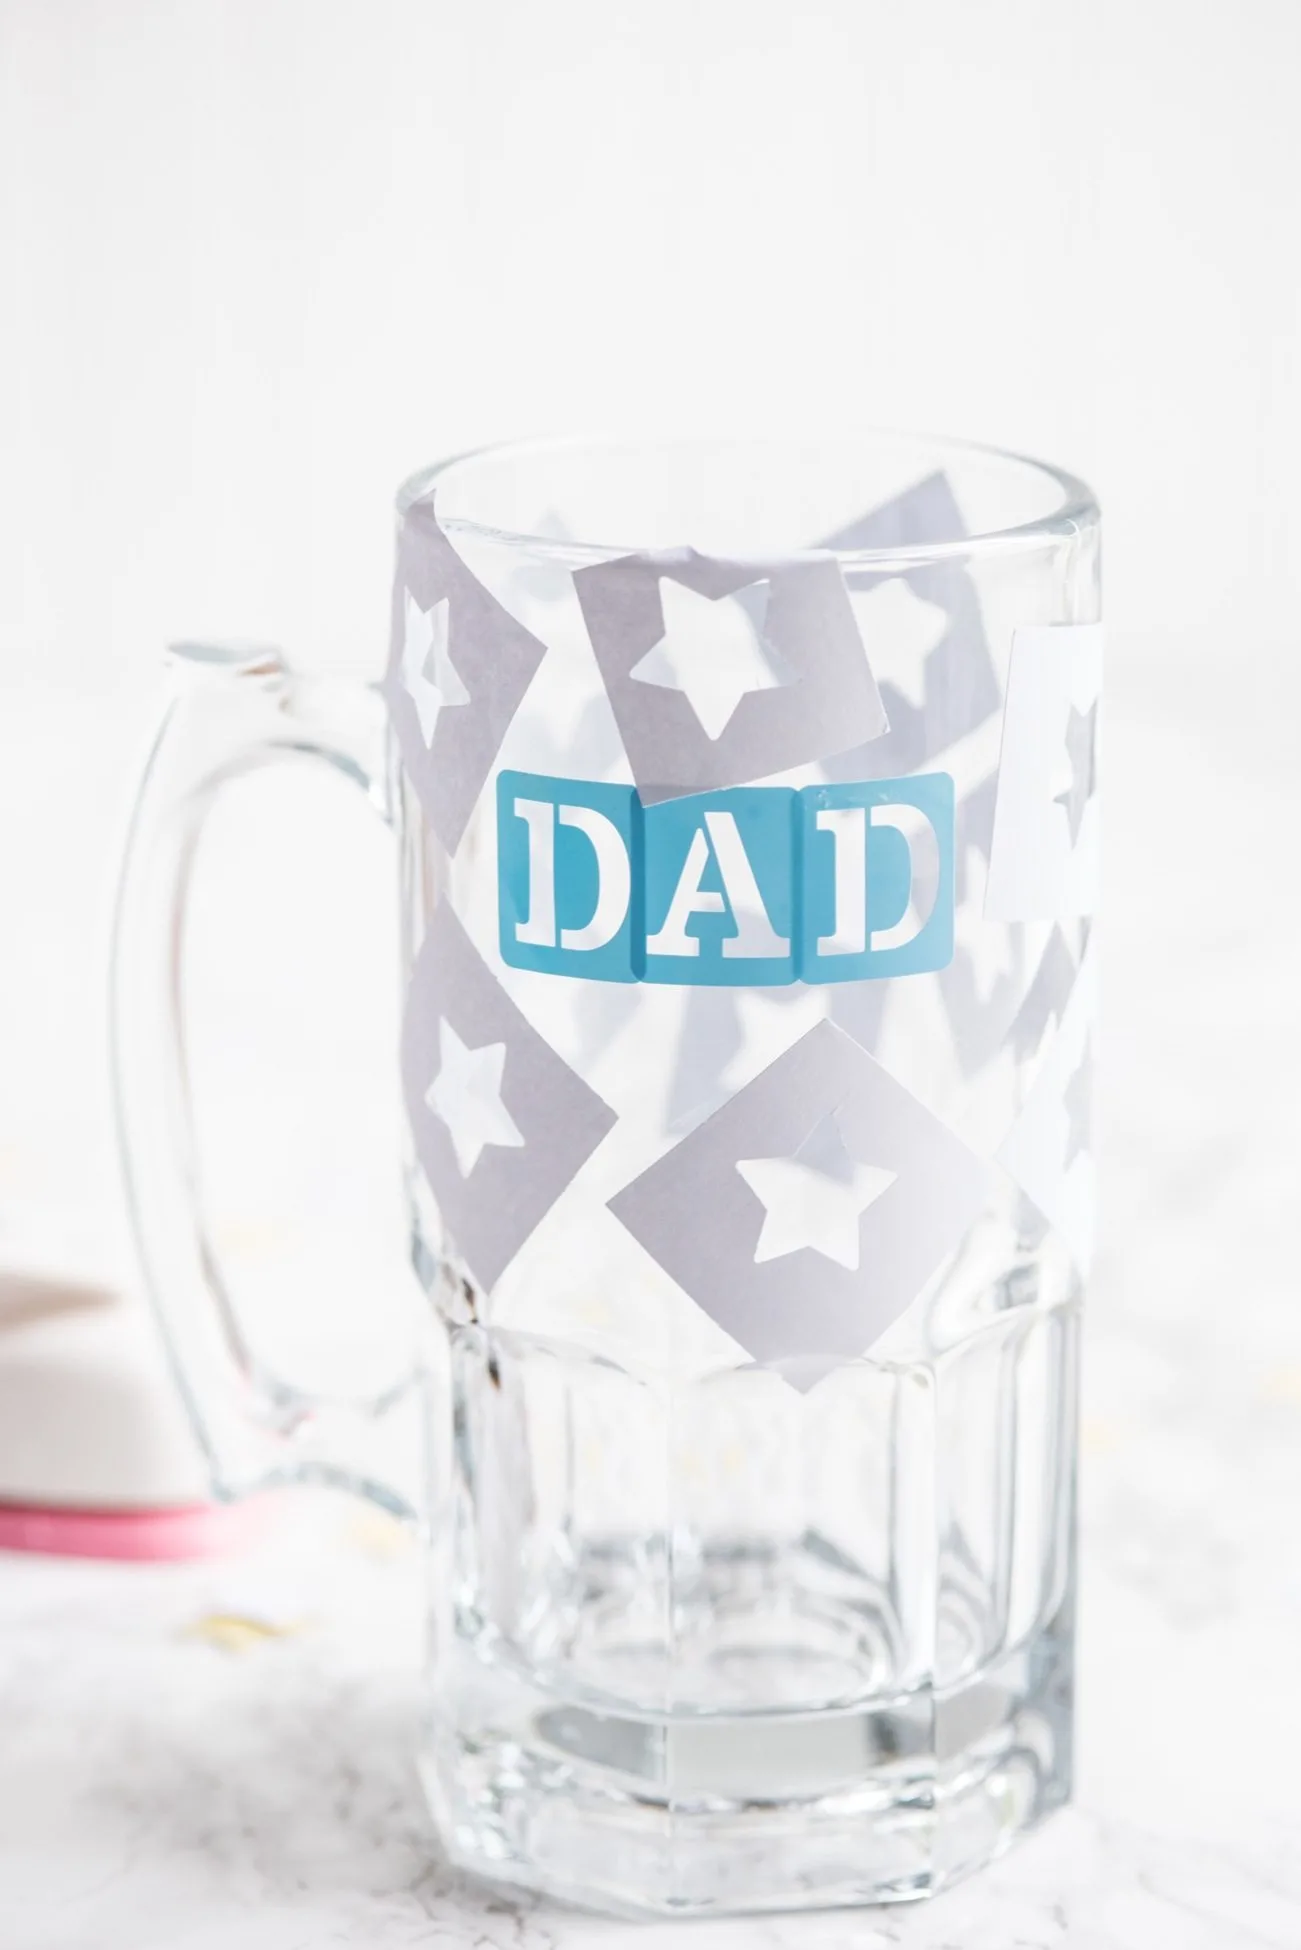 DIY Etched Beer Mugs for Father's Day | Father's Day gift ideas, DIY projects, homemade gifts ideas, homemade Father's Day gifts, entertaining tips and more from @cydconverse